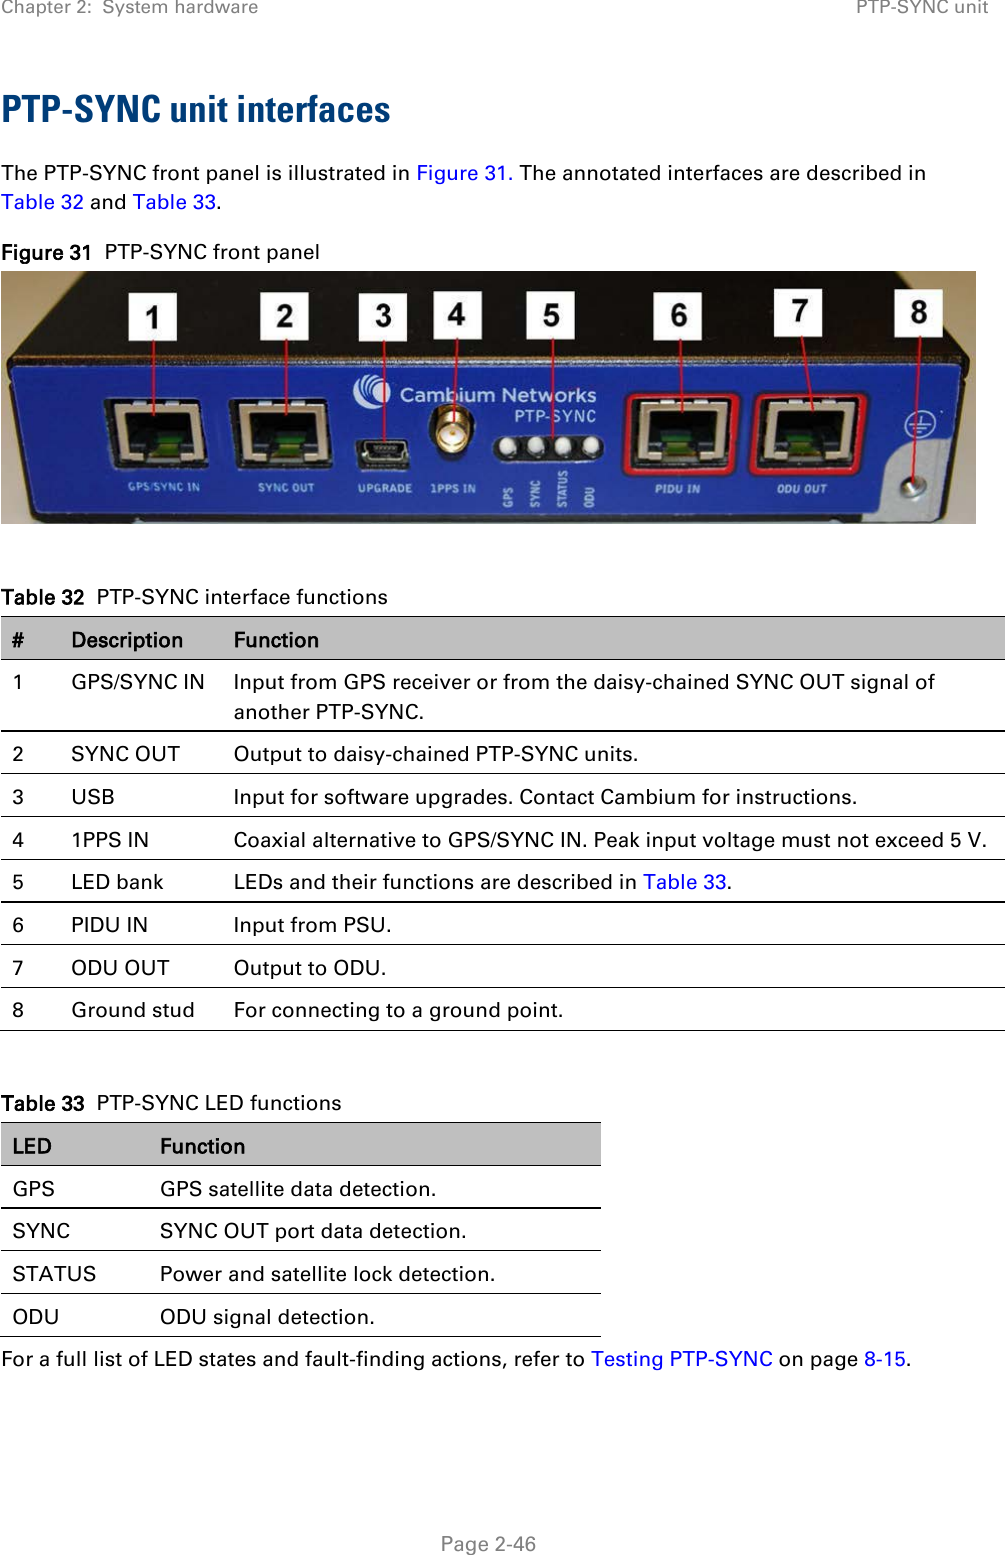 Chapter 2:  System hardware PTP-SYNC unit  PTP-SYNC unit interfaces The PTP-SYNC front panel is illustrated in Figure 31. The annotated interfaces are described in Table 32 and Table 33. Figure 31  PTP-SYNC front panel   Table 32  PTP-SYNC interface functions # Description Function 1  GPS/SYNC IN Input from GPS receiver or from the daisy-chained SYNC OUT signal of another PTP-SYNC. 2  SYNC OUT Output to daisy-chained PTP-SYNC units. 3  USB Input for software upgrades. Contact Cambium for instructions. 4  1PPS IN Coaxial alternative to GPS/SYNC IN. Peak input voltage must not exceed 5 V. 5  LED bank LEDs and their functions are described in Table 33. 6  PIDU IN Input from PSU. 7  ODU OUT Output to ODU. 8  Ground stud For connecting to a ground point.  Table 33  PTP-SYNC LED functions LED Function GPS GPS satellite data detection. SYNC SYNC OUT port data detection. STATUS Power and satellite lock detection. ODU ODU signal detection. For a full list of LED states and fault-finding actions, refer to Testing PTP-SYNC on page 8-15.     Page 2-46 